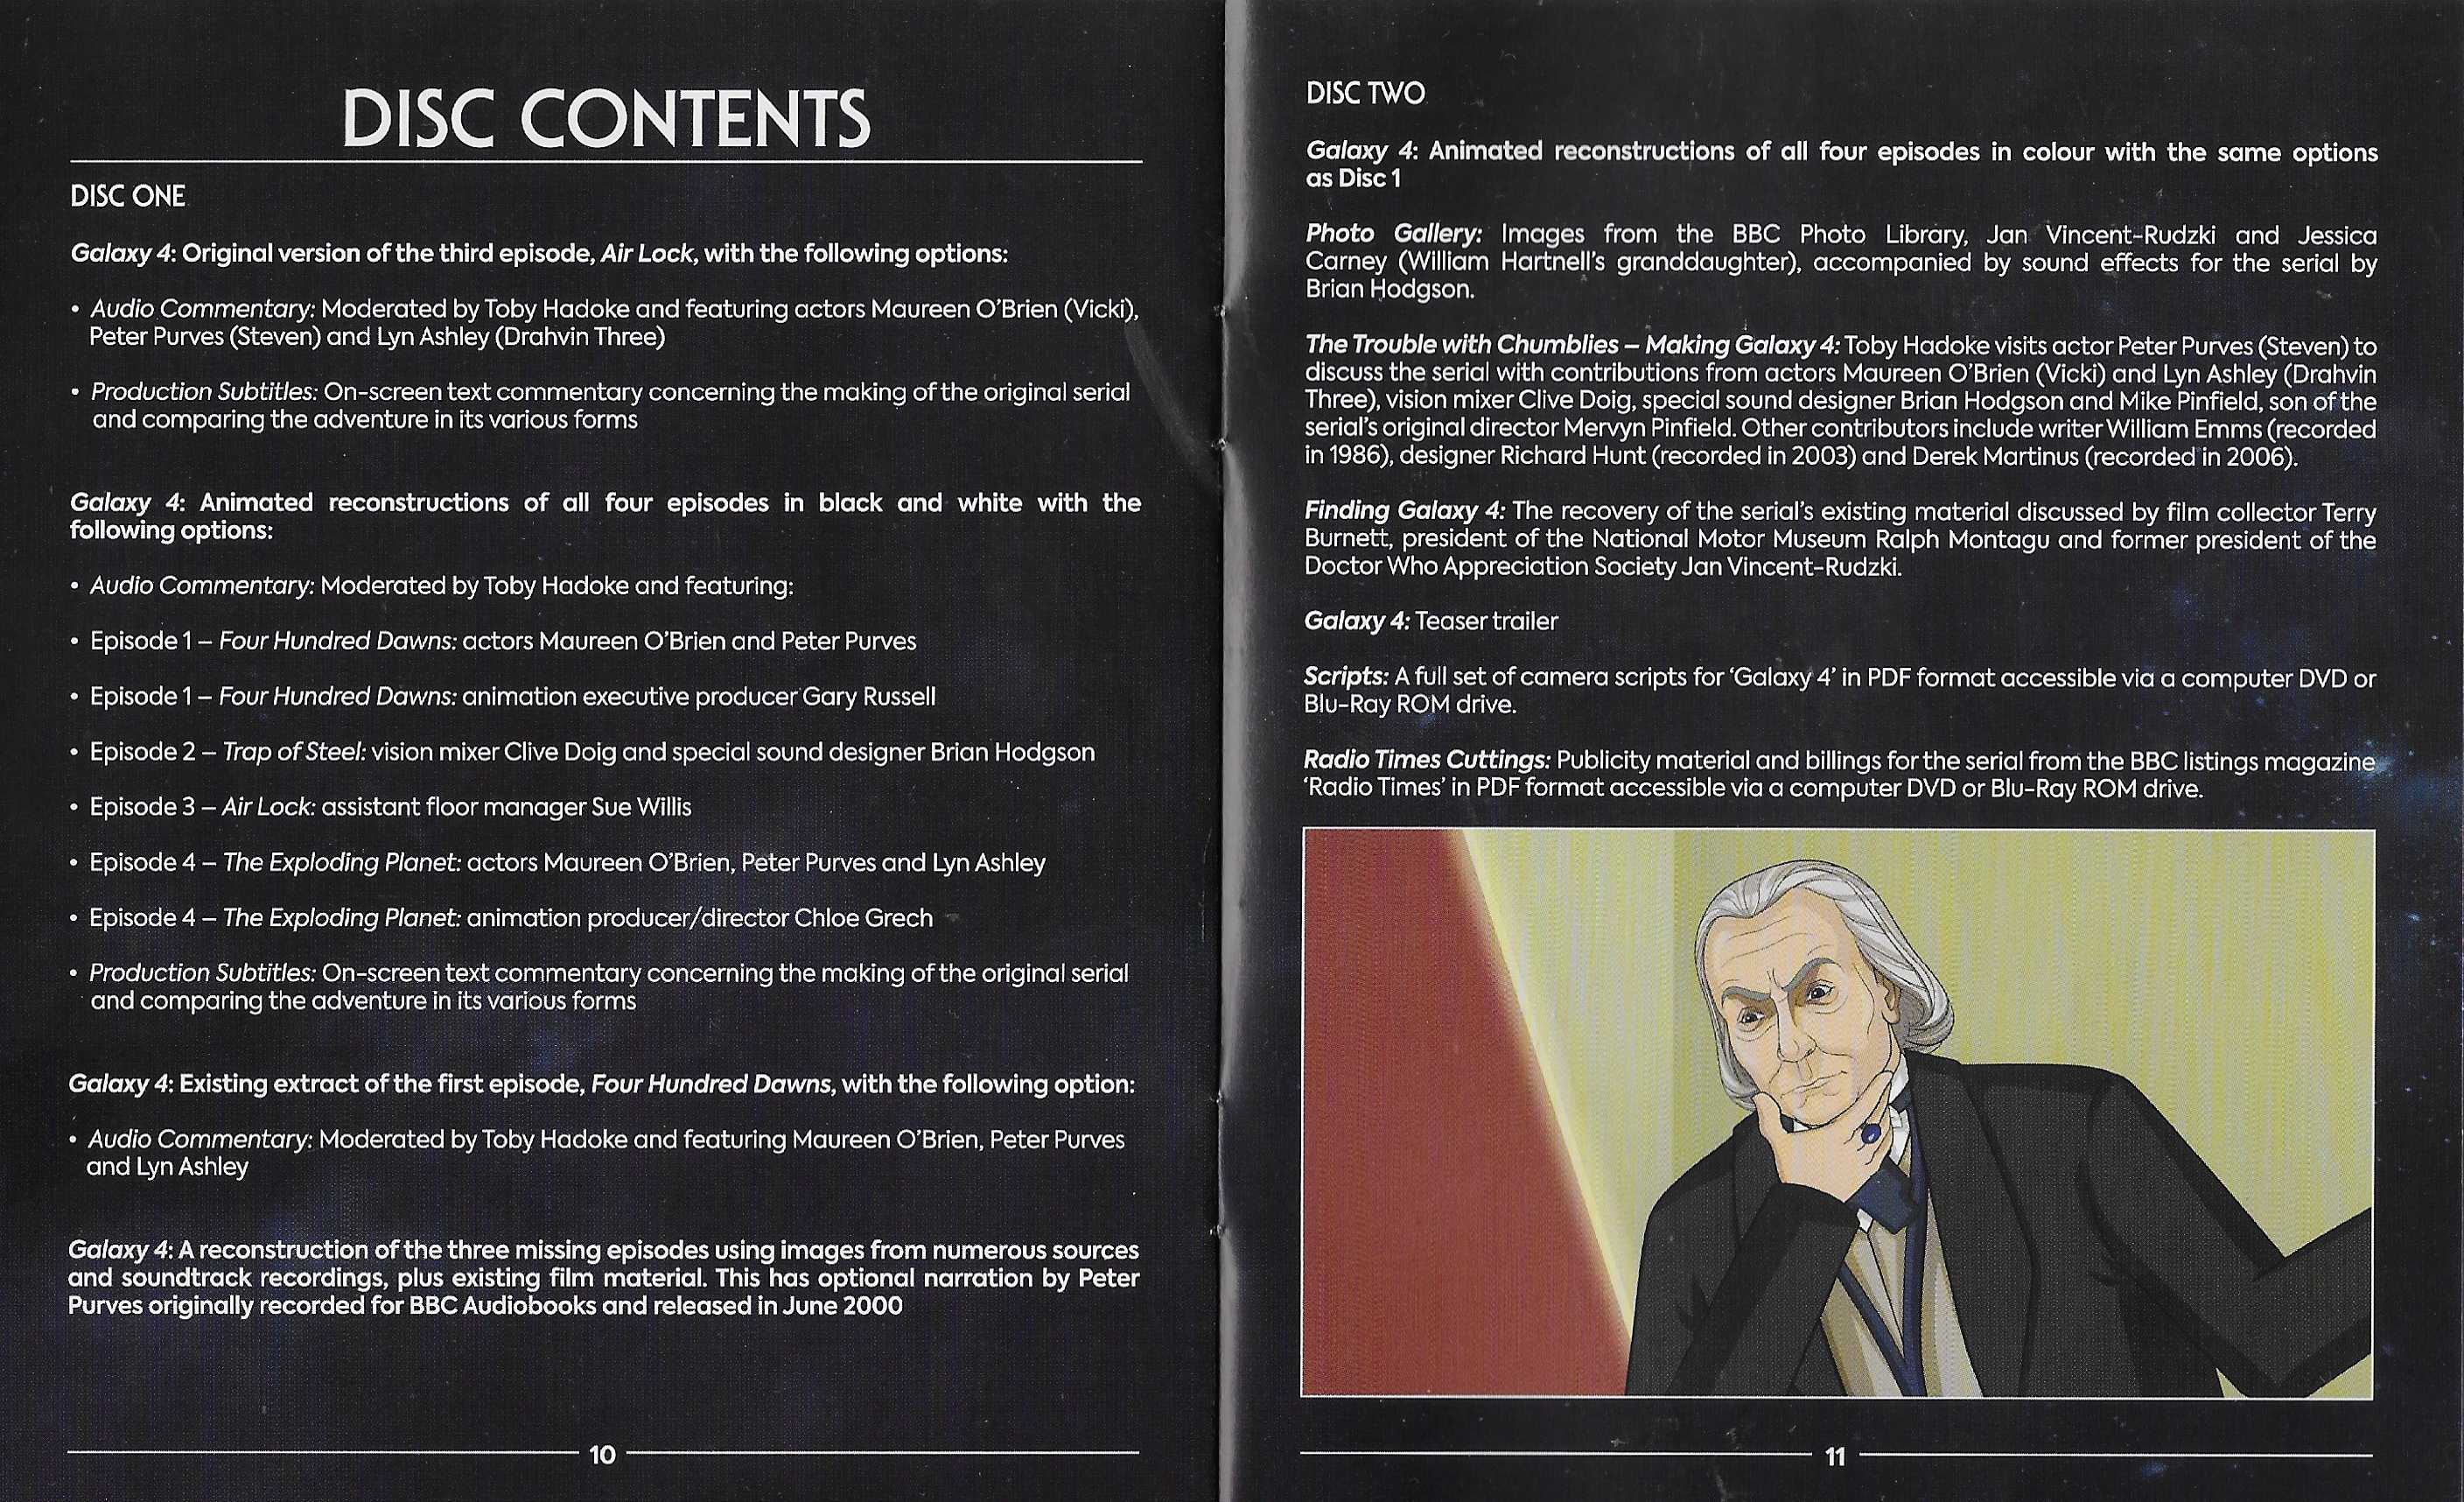 Inserts from BBCDVD 4463